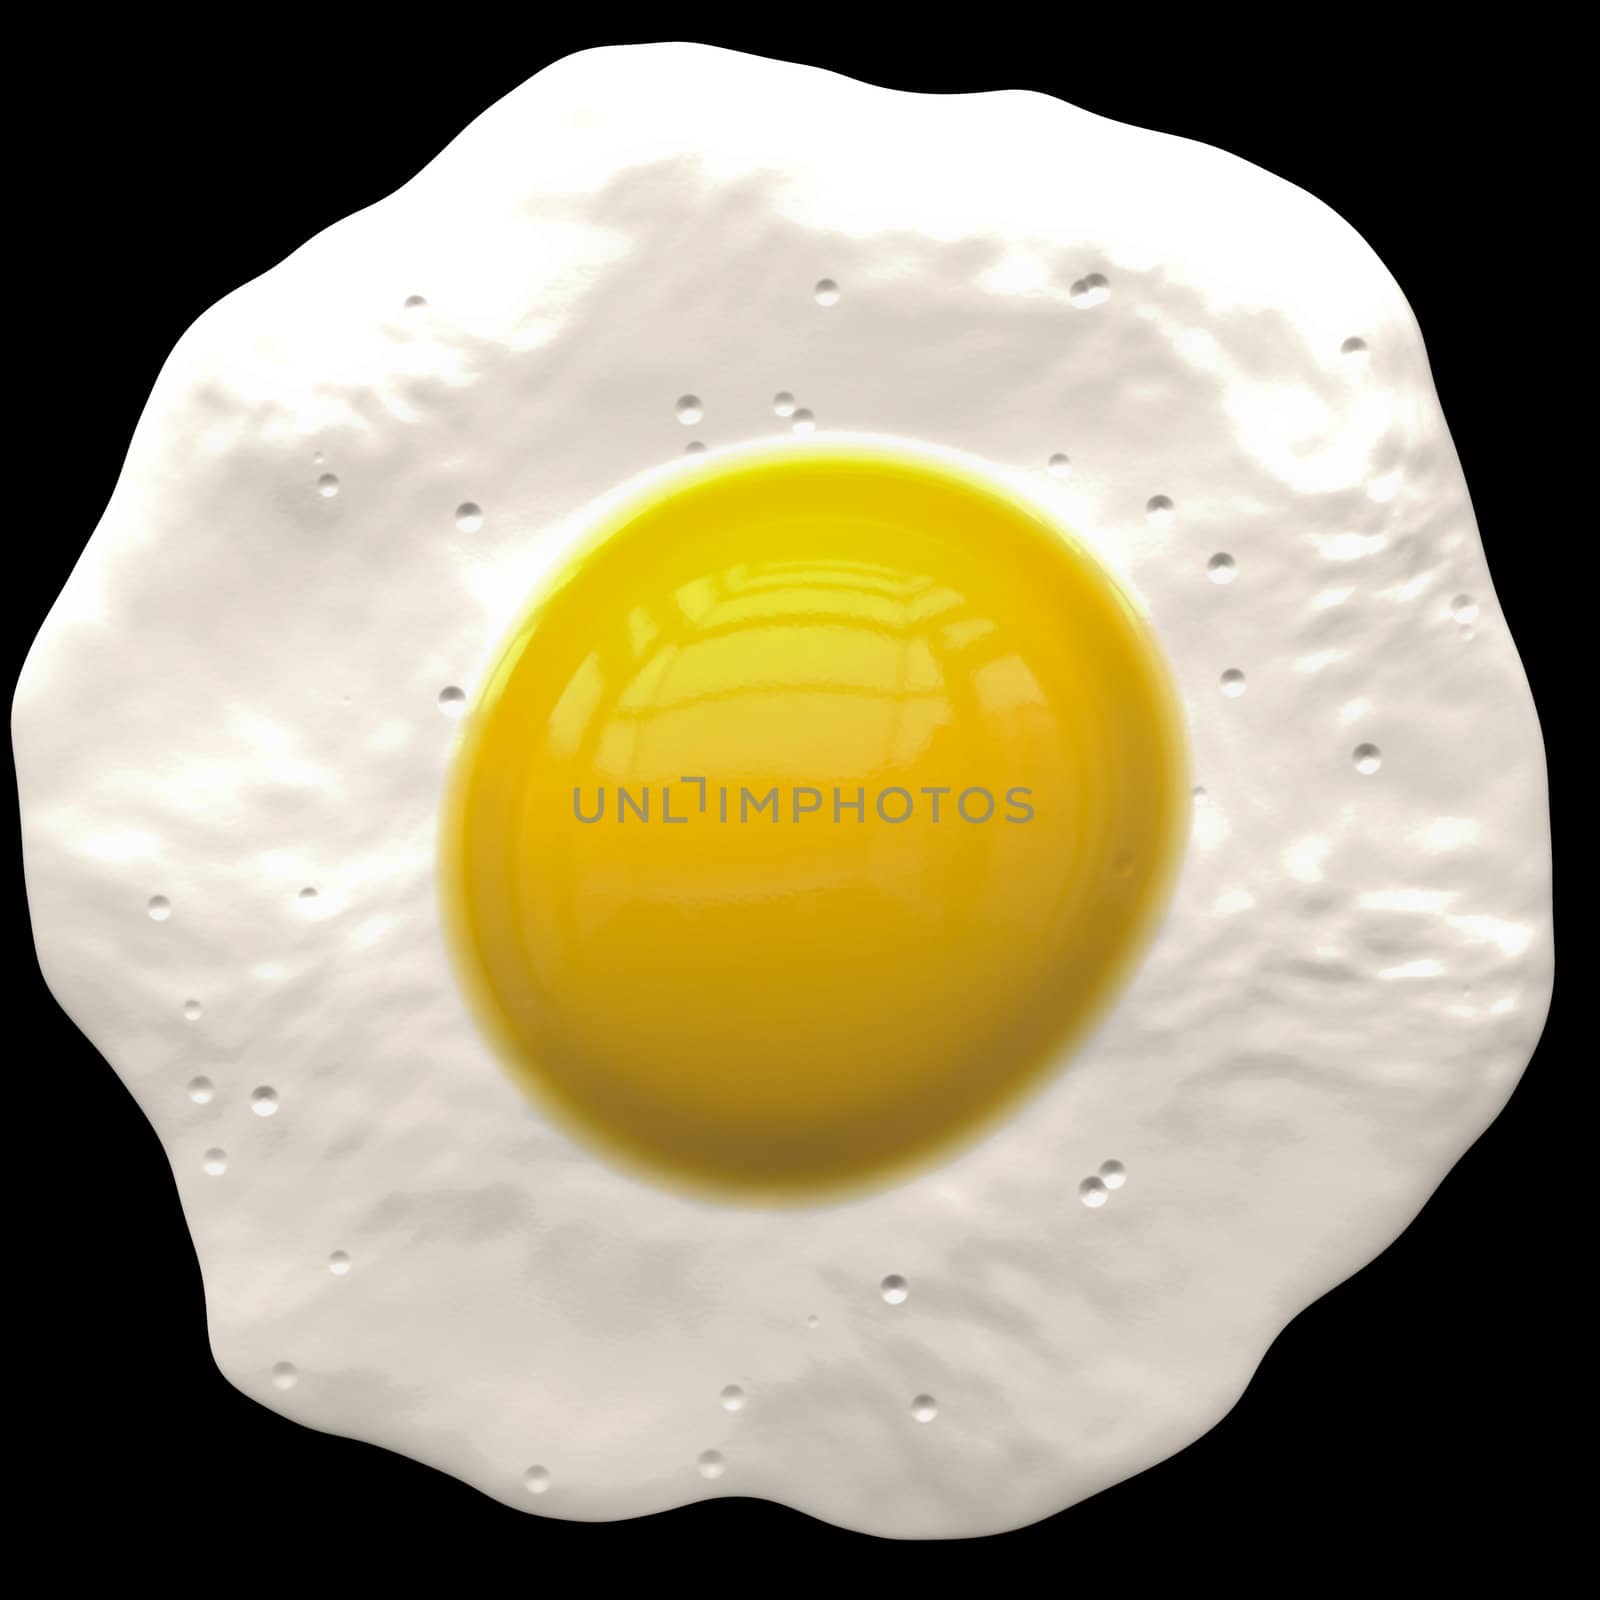 a large rendered fried egg on plain black background for easy cut out